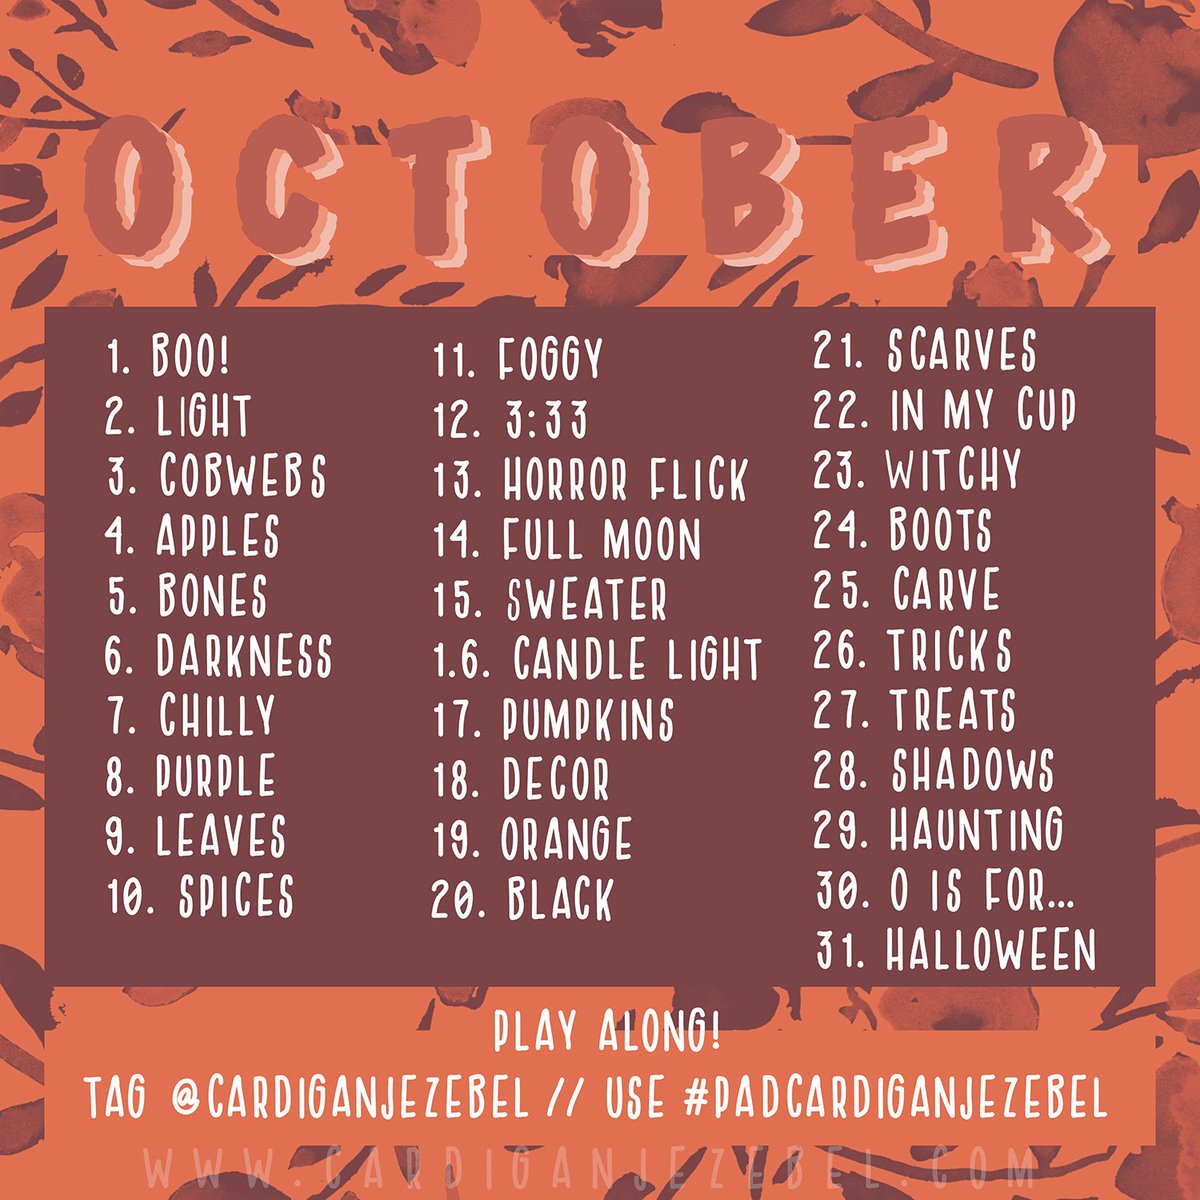 *NEW POST*

My October photo challenge is LIVE! 

Grab the  prompt list and get ready to join in!

cardiganjezebel.com/2019/09/photo-…

#PADcardiganjezebel #photoadayoctober #shinyhappybloggers #bloggerstribe